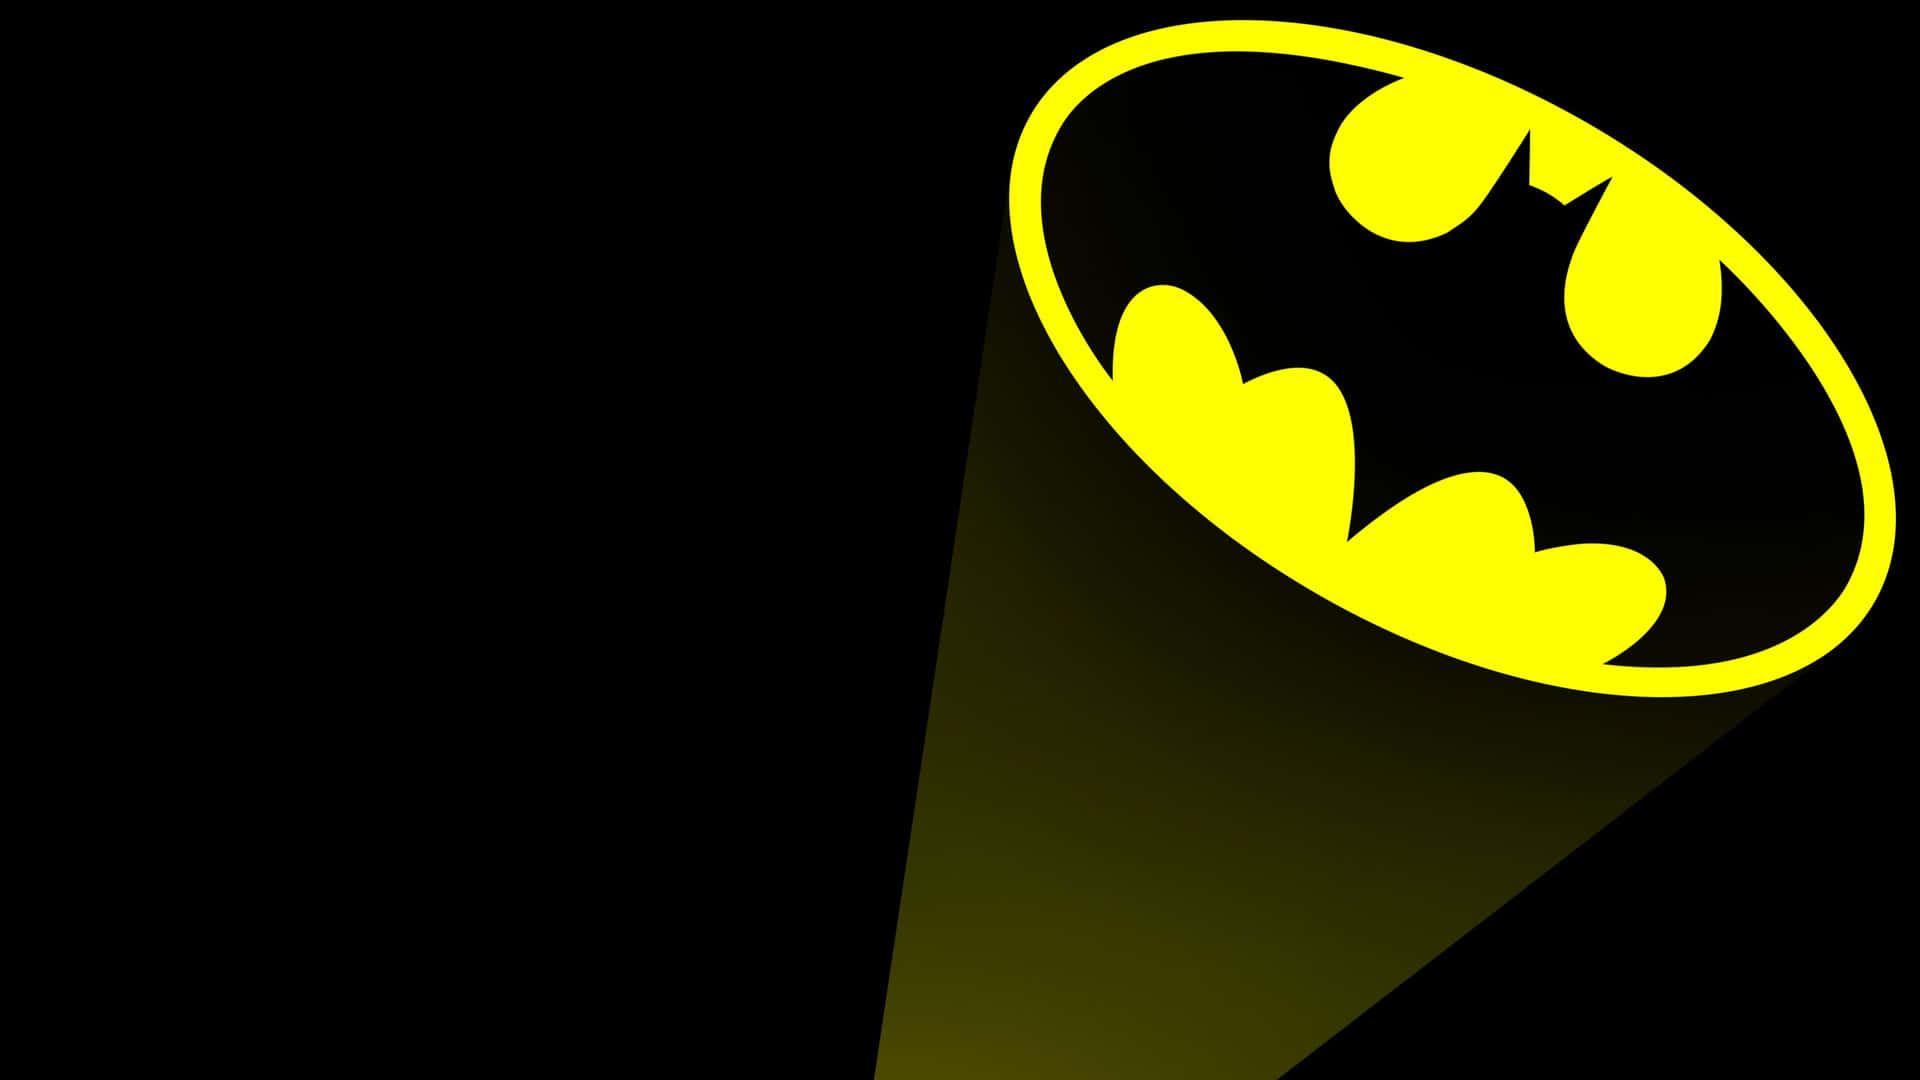 A Radiant Bat Signal Lighting Up The Night Sky Background